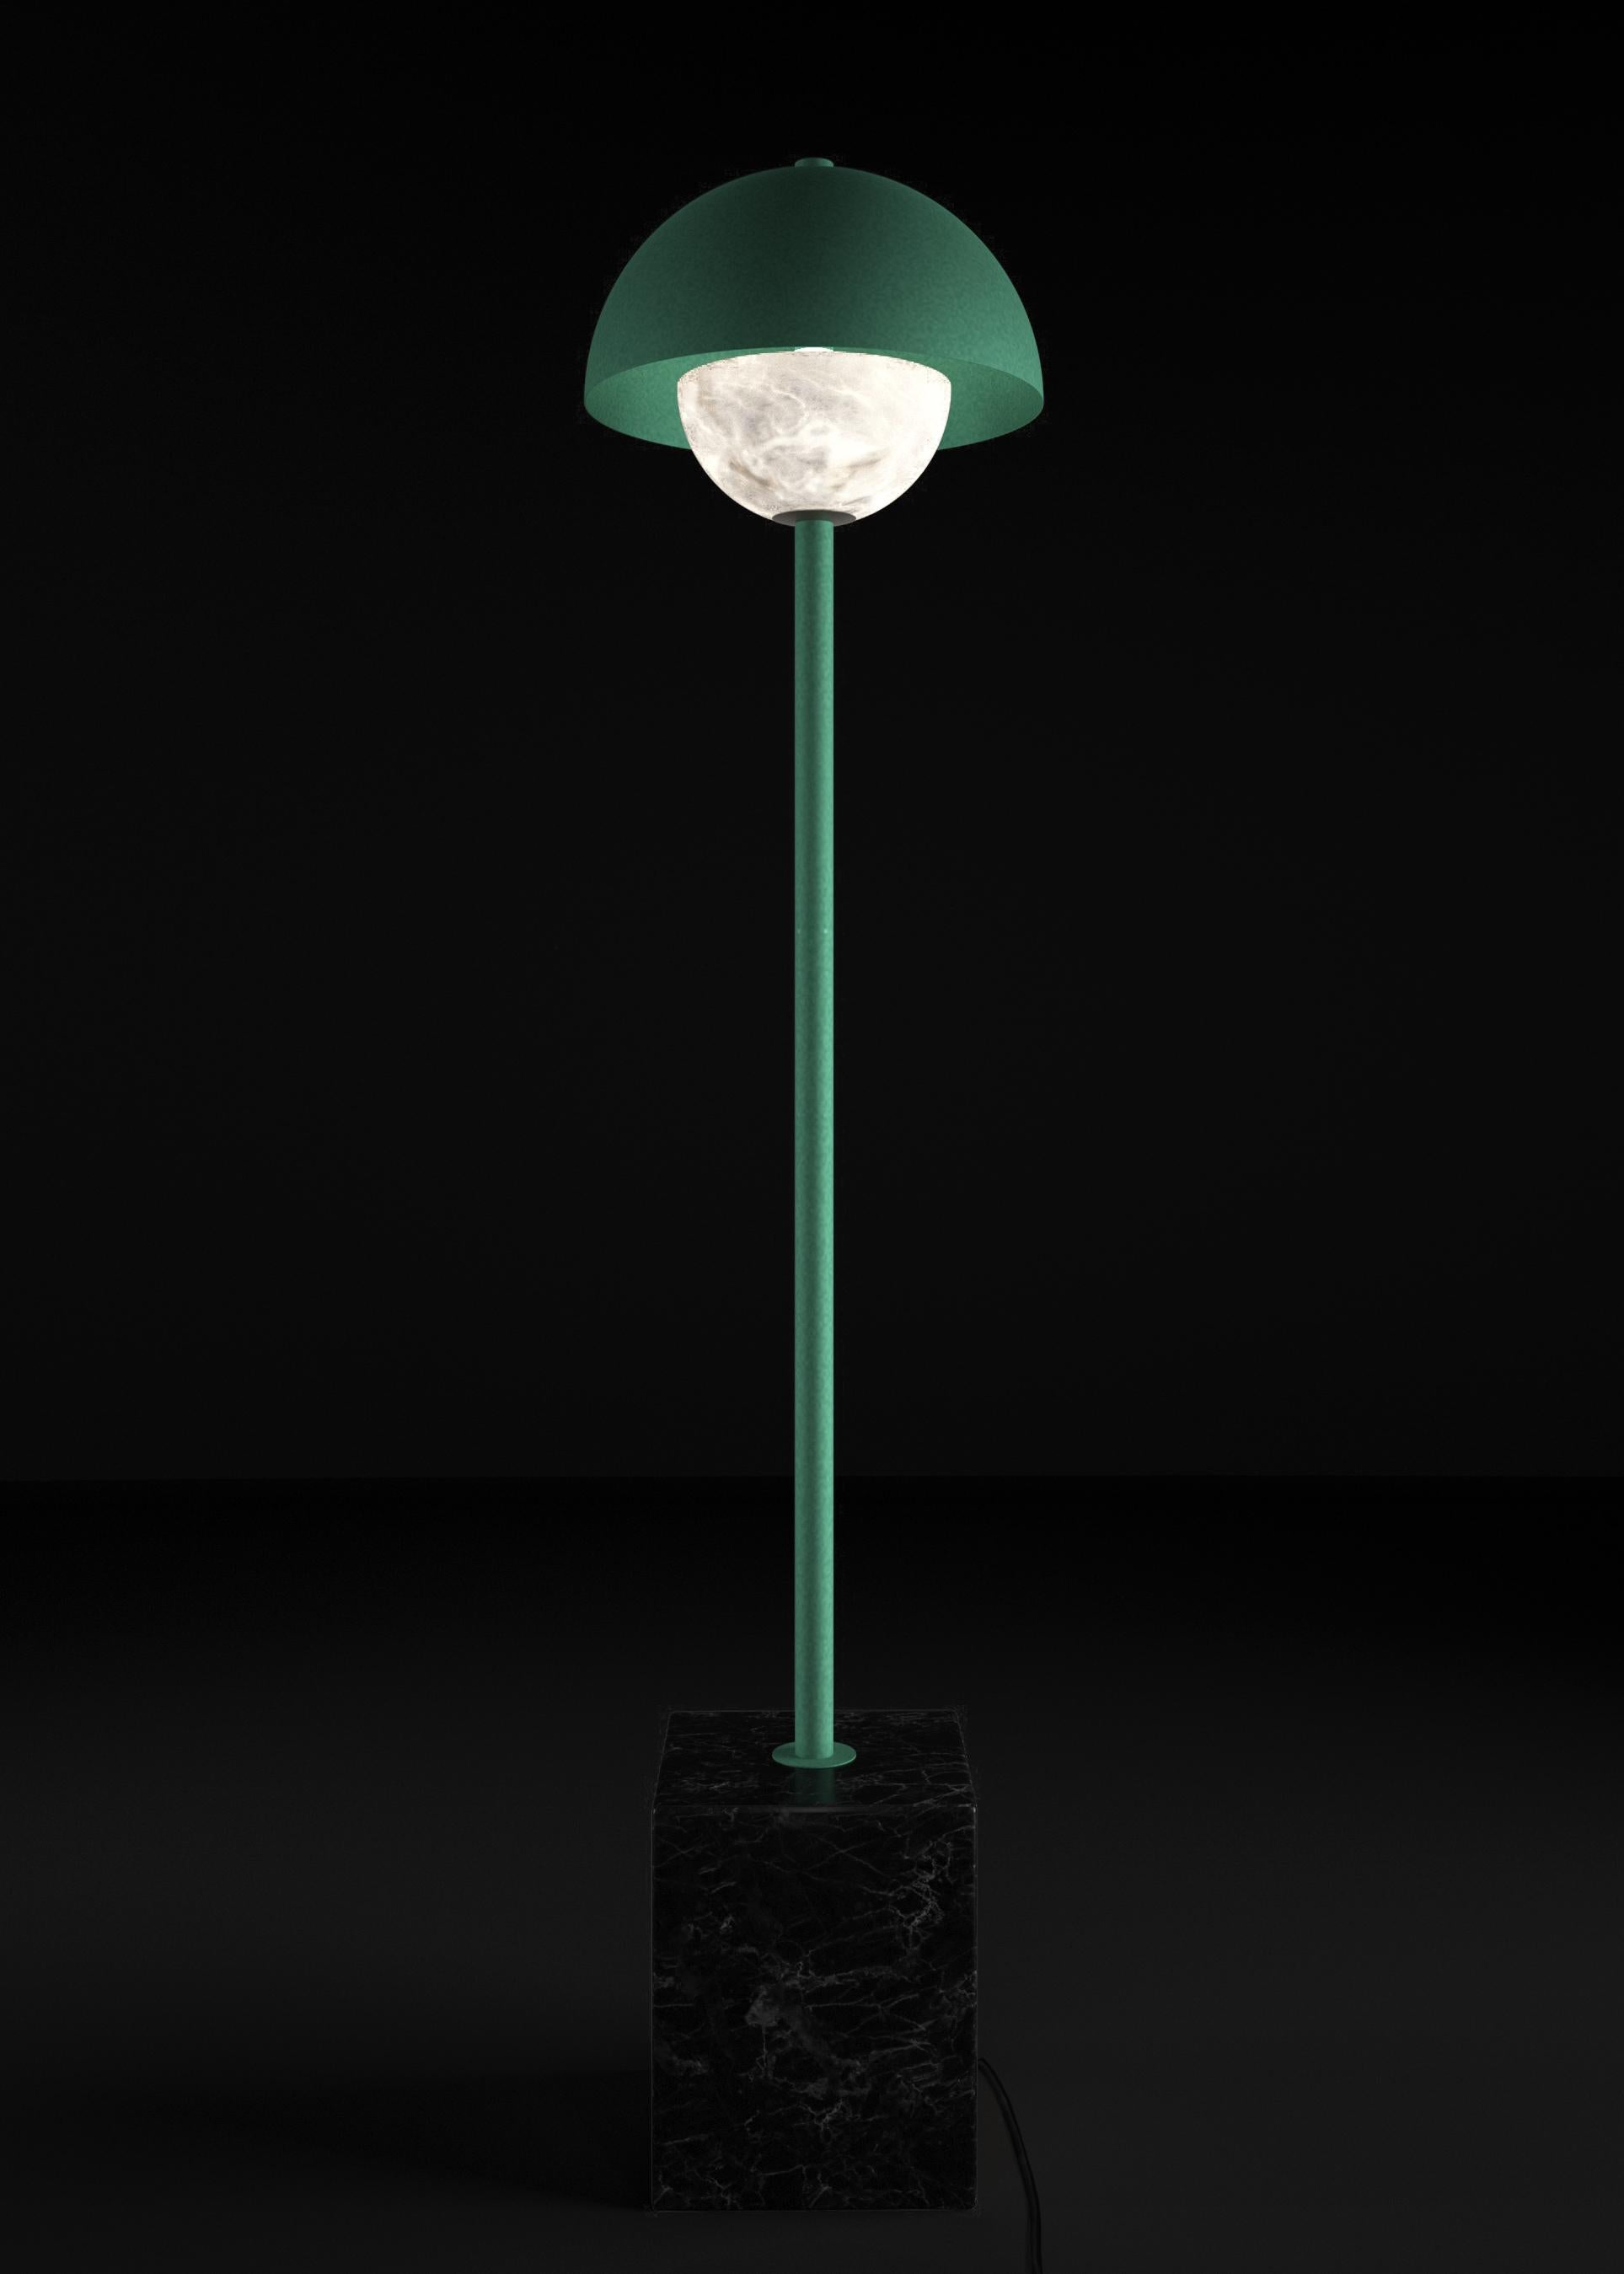 Apollo Freedom Green Metal Floor Lamp by Alabastro Italiano
Dimensions: D 30 x W 30 x H 130 cm.
Materials: White alabaster, Nero Marquinia marble, black silk cables and metal.

Available in different finishes: Shiny Silver, Bronze, Brushed Brass,